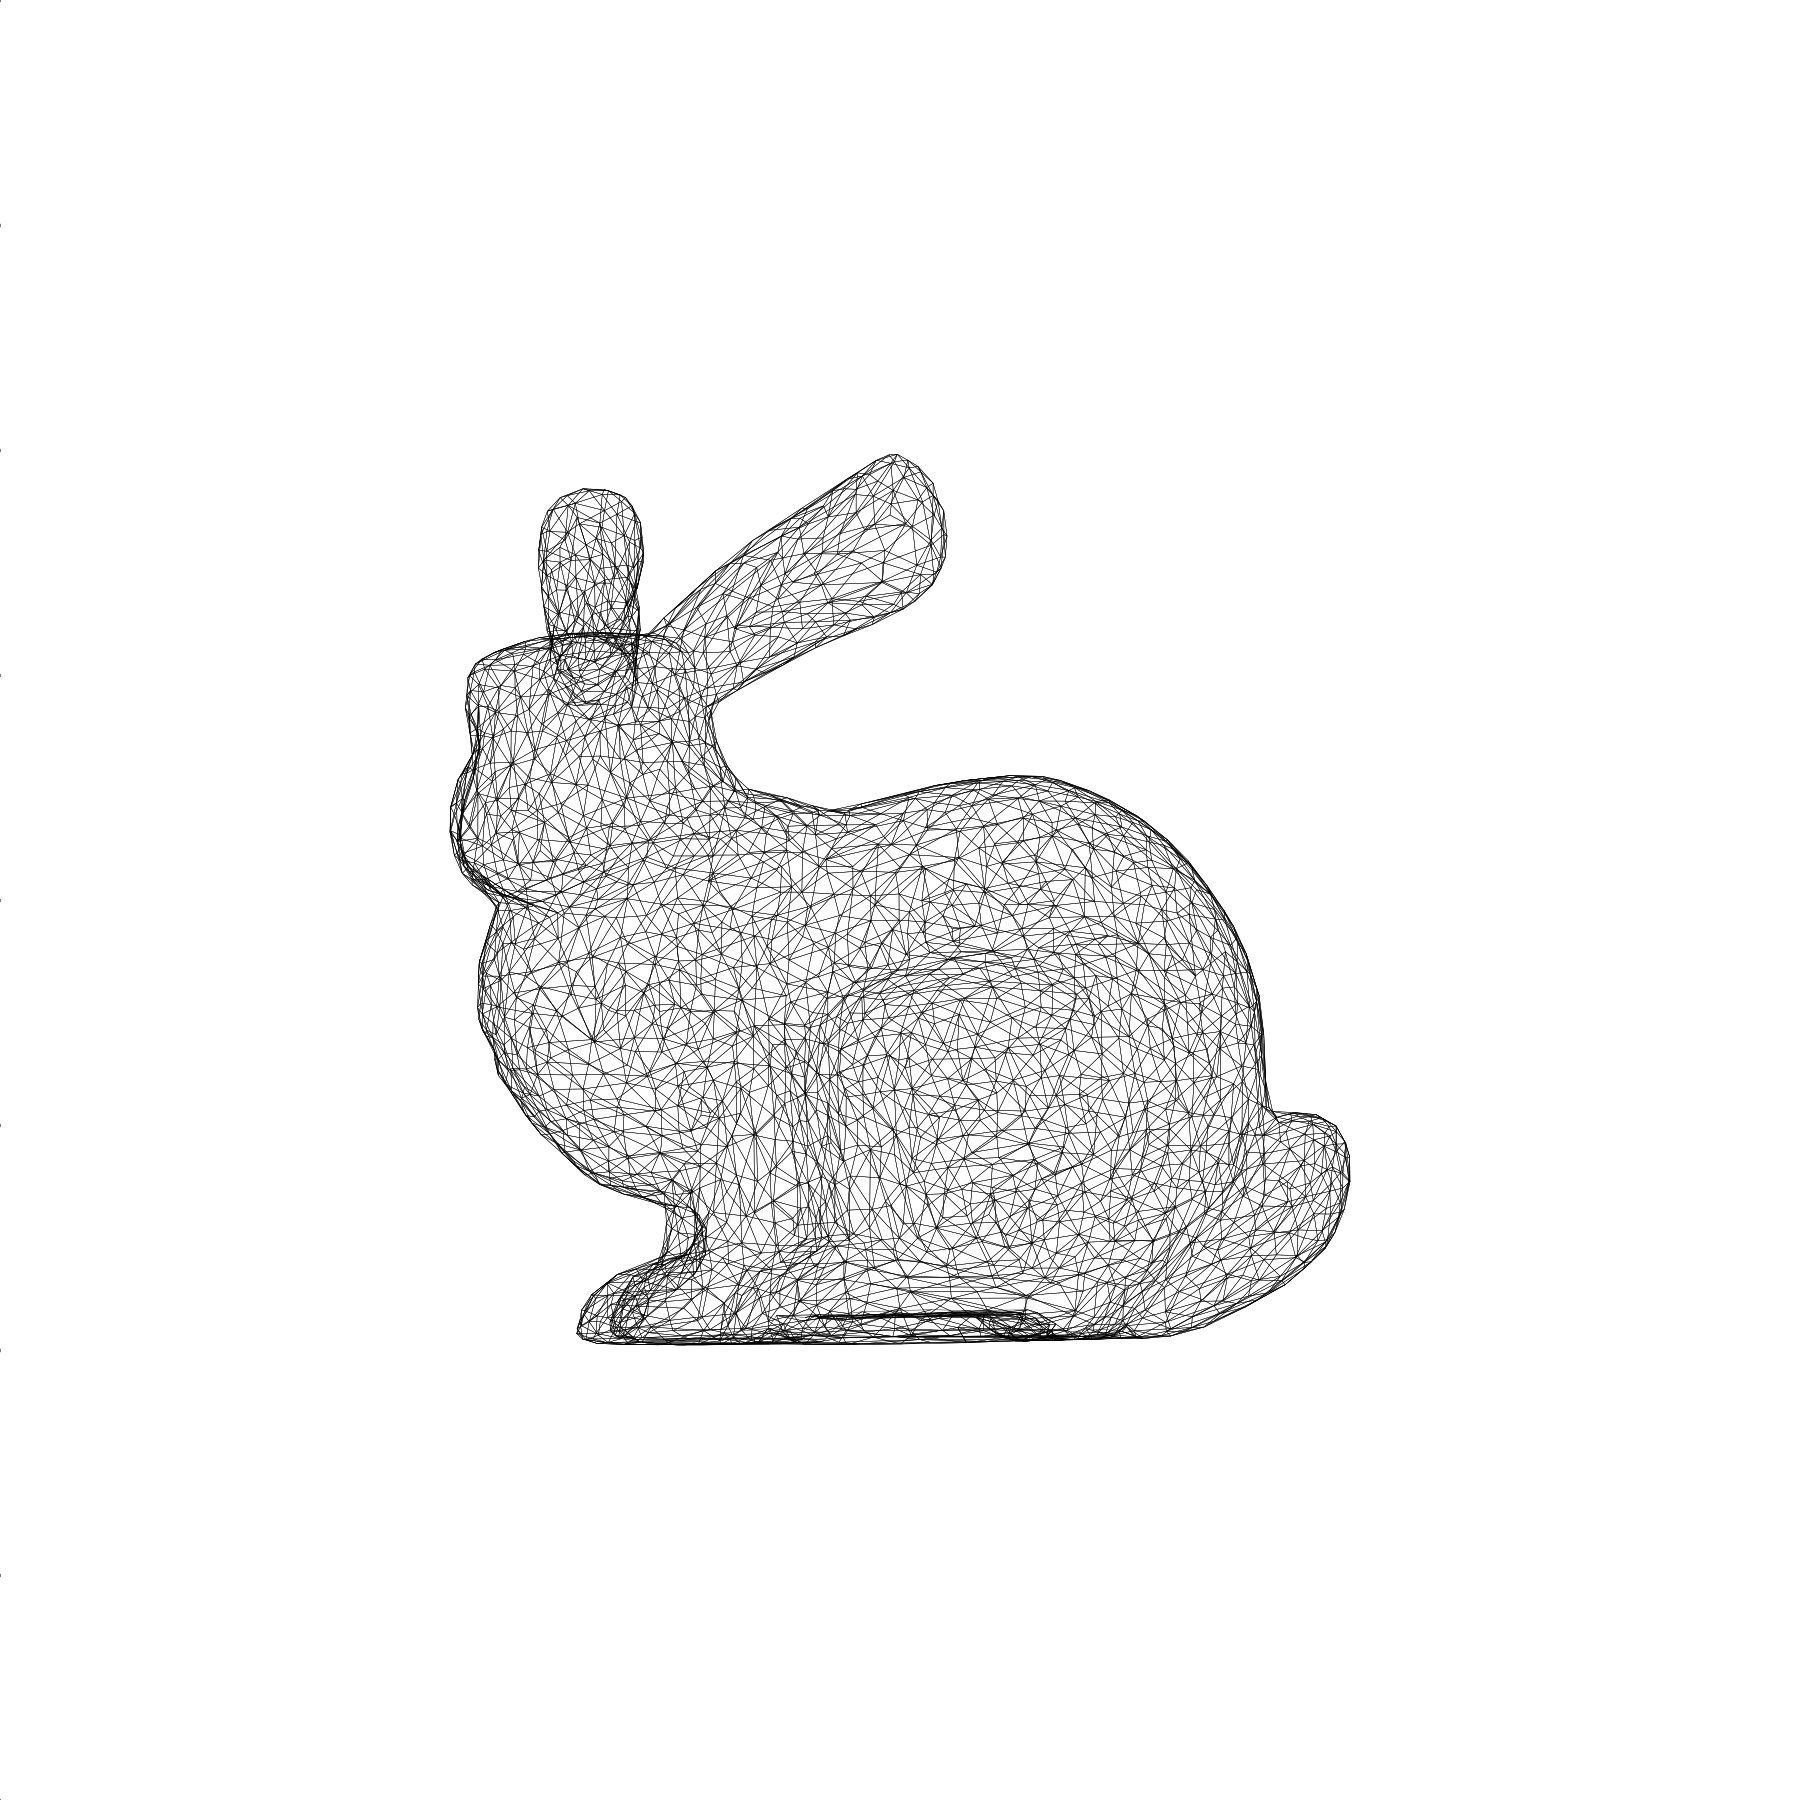 A black and white outline of a bunny facing left side.